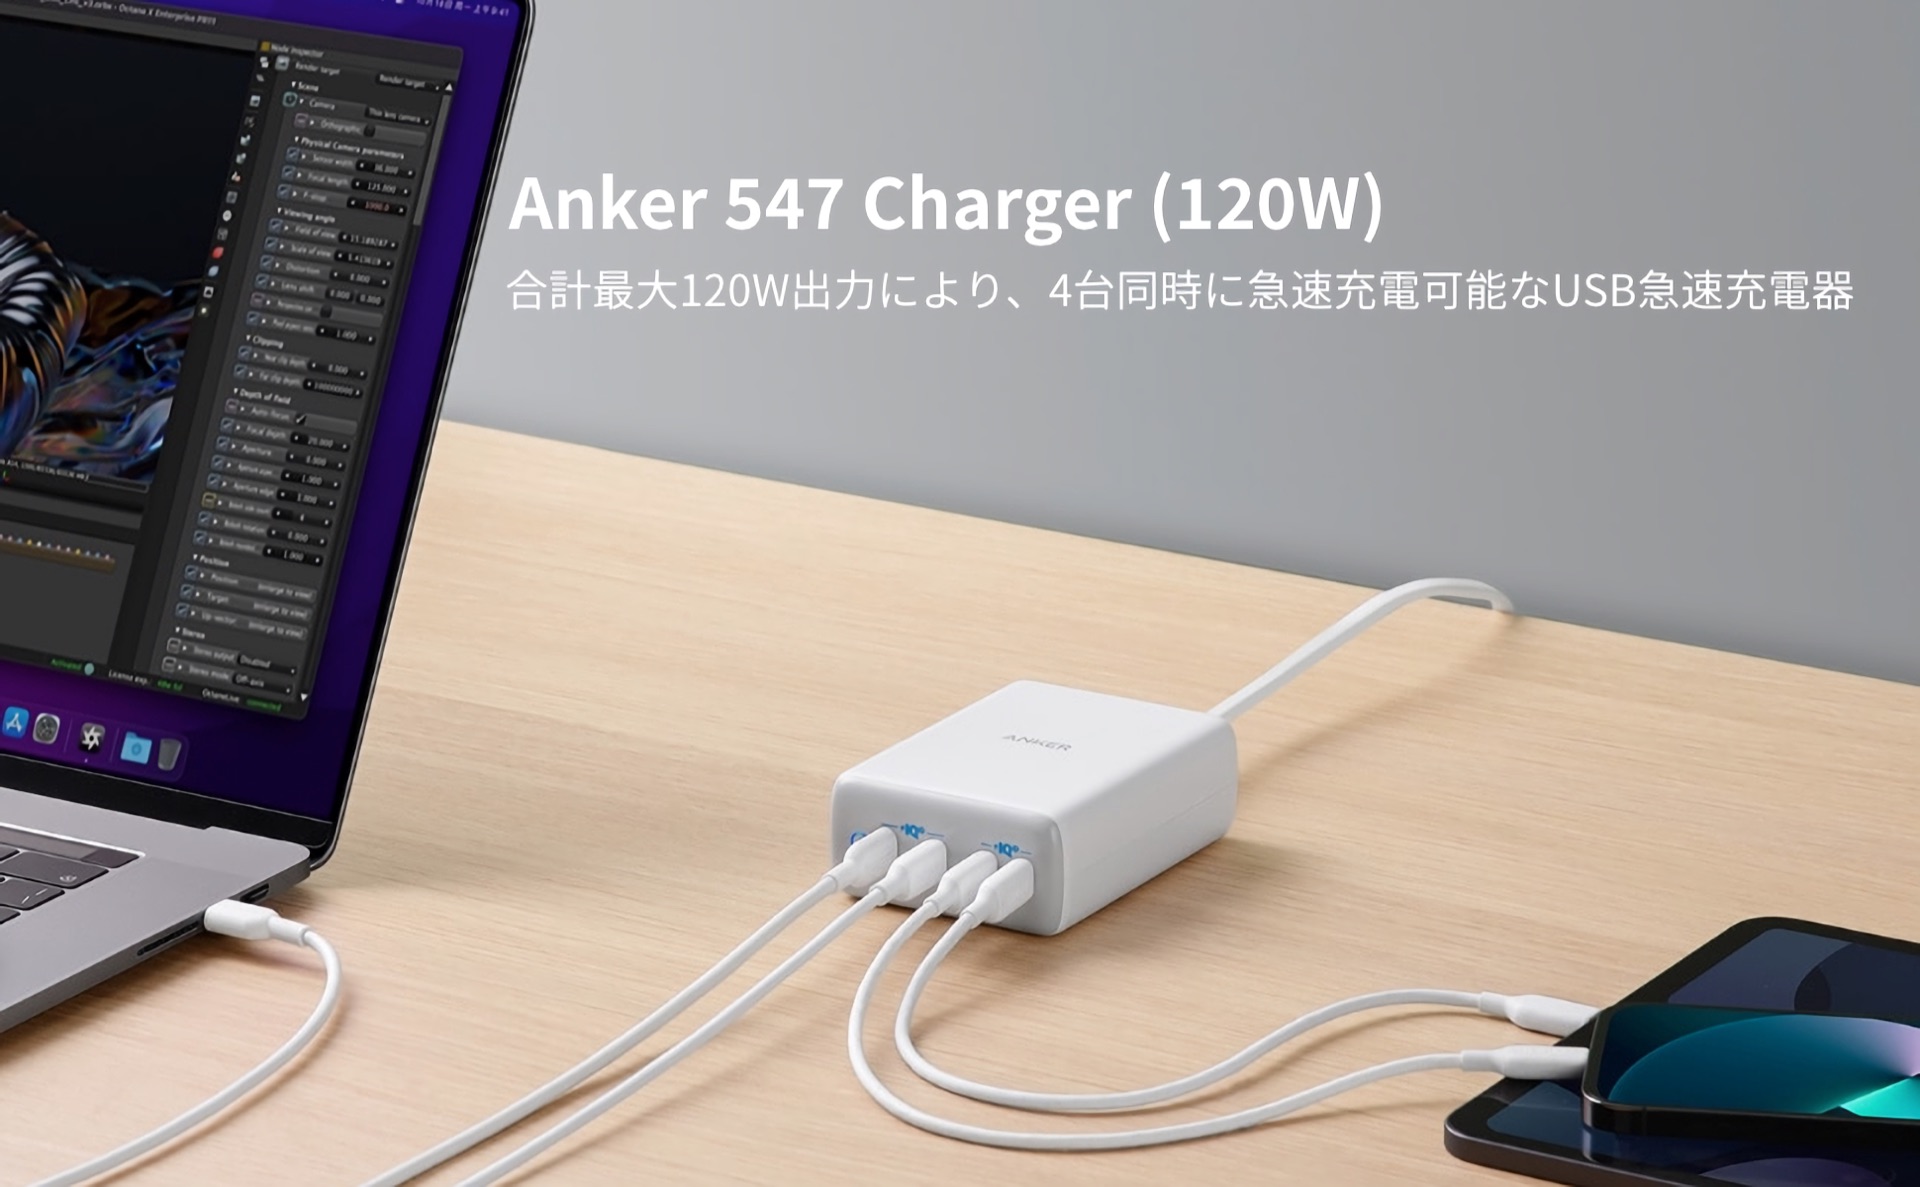 Anker 547 Charger 120W A2144521 Hero